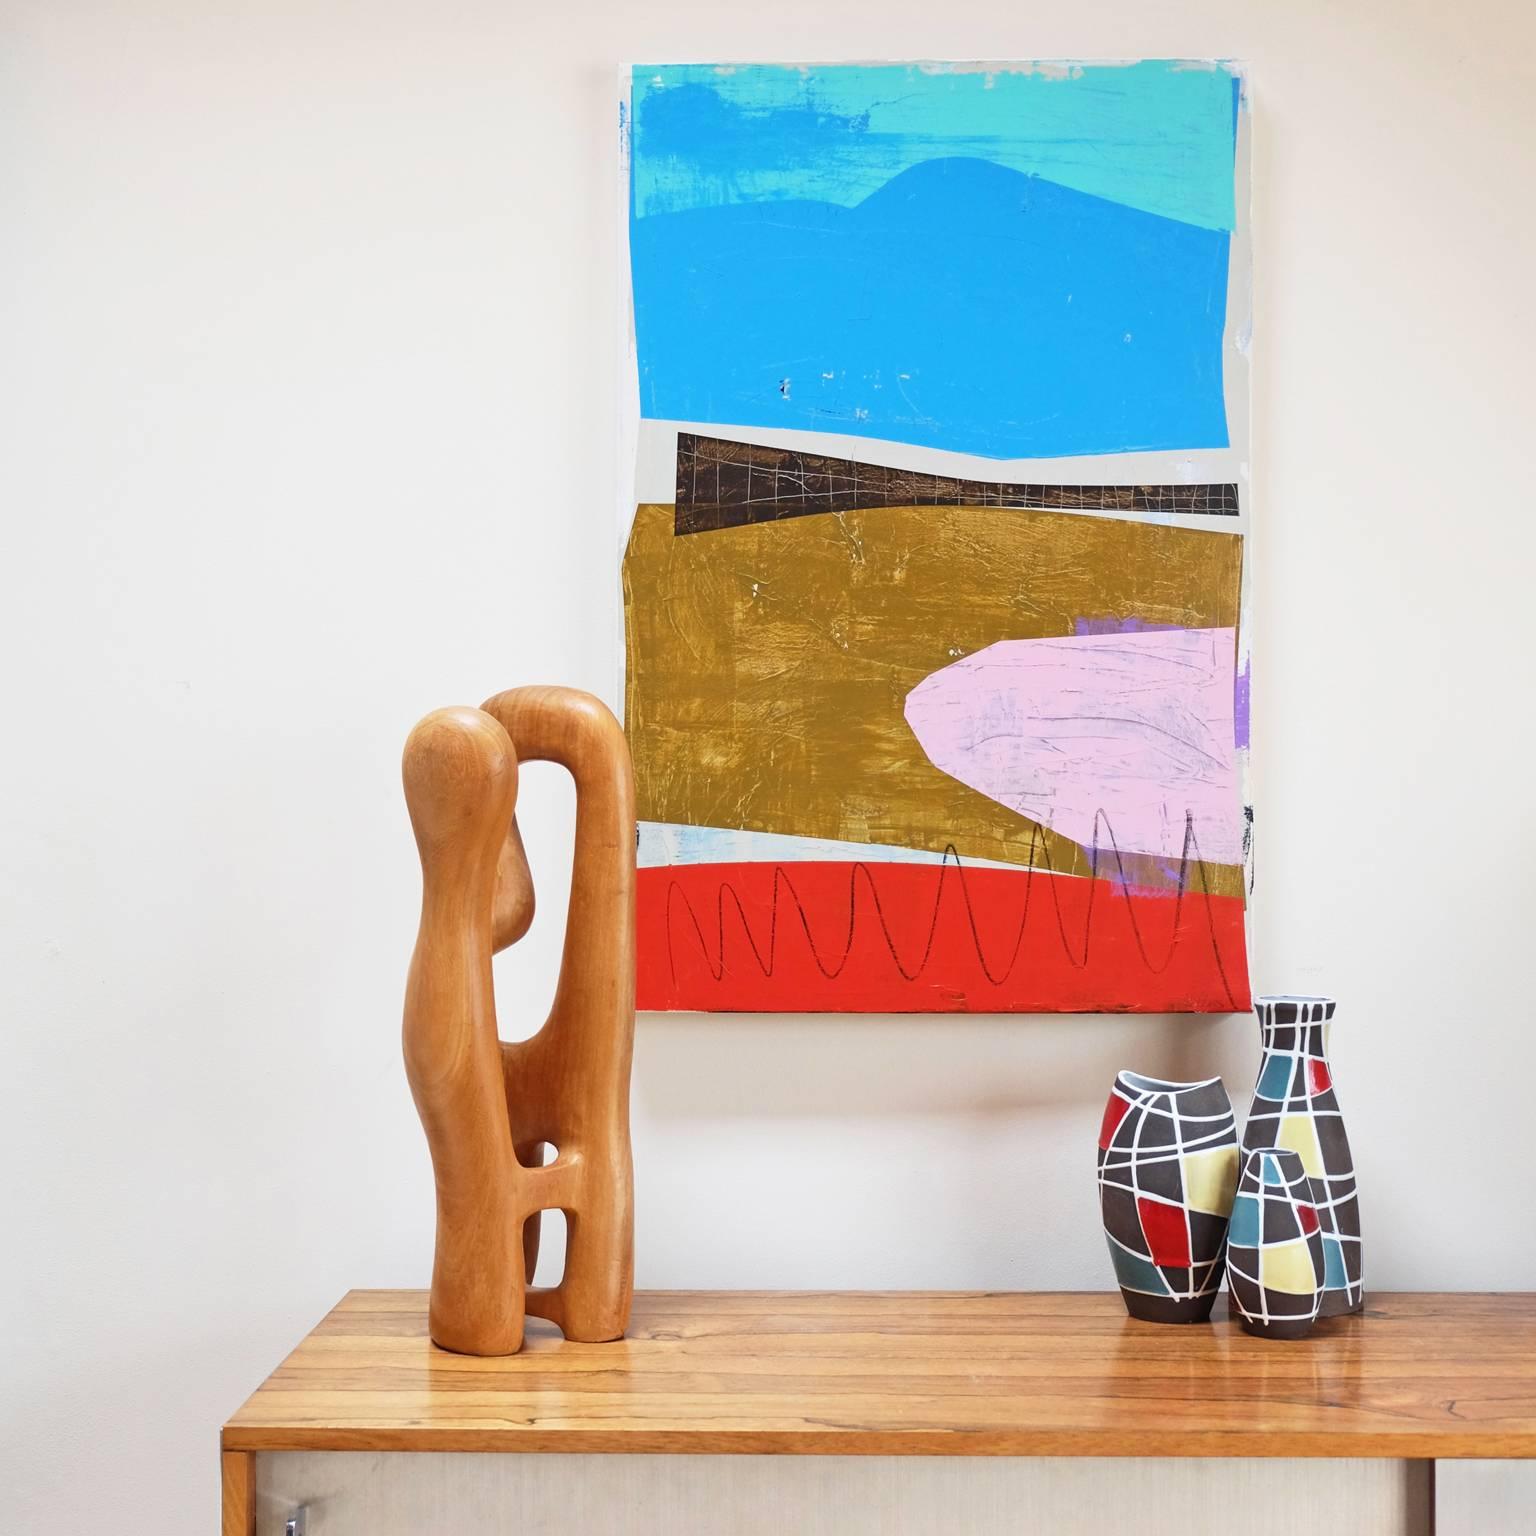 Acrylic and oil on canvas by Alan Fears, 2015.

Part of the 'Landshapes' series, 2015.

Landshapes is a series of paintings that experiment with colour blocking, sketching motifs and fragmenting English landscapes. Based on memories of living on